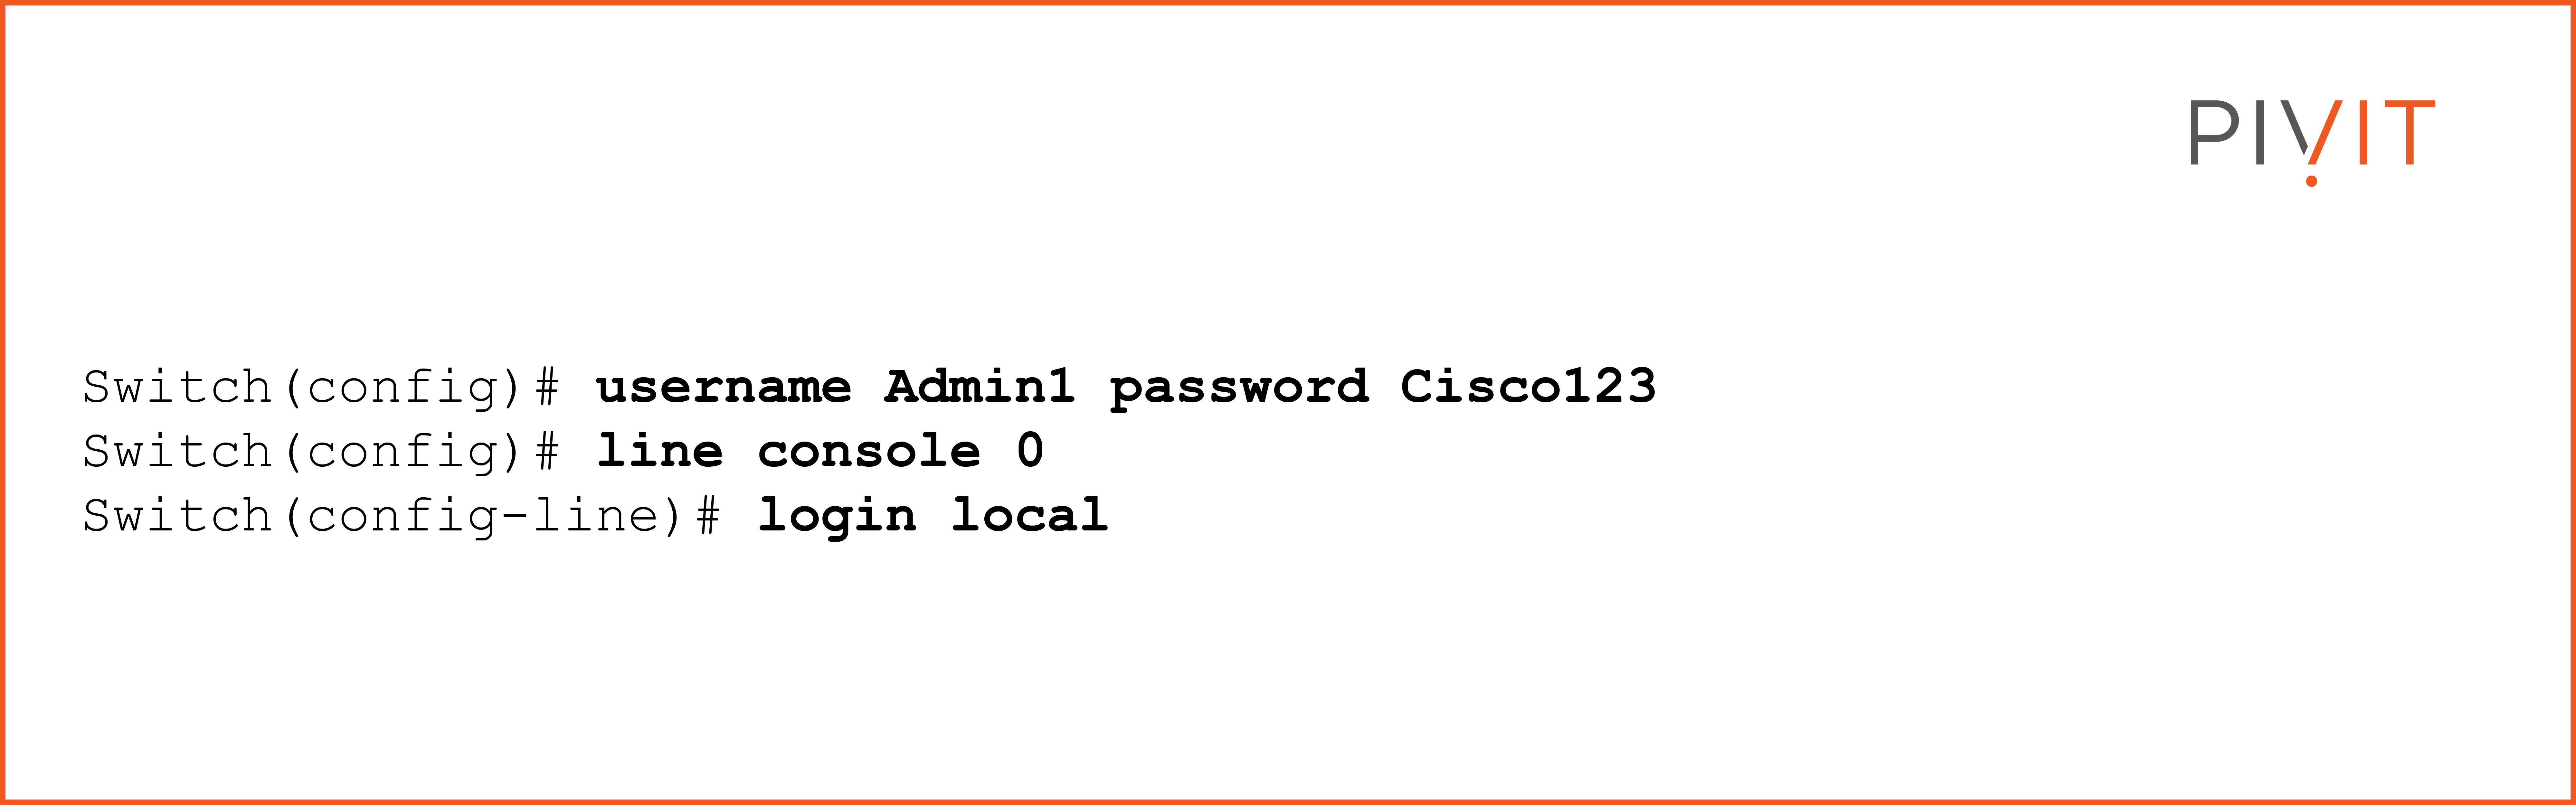 Commands to create a local account and use it for the protection of console access